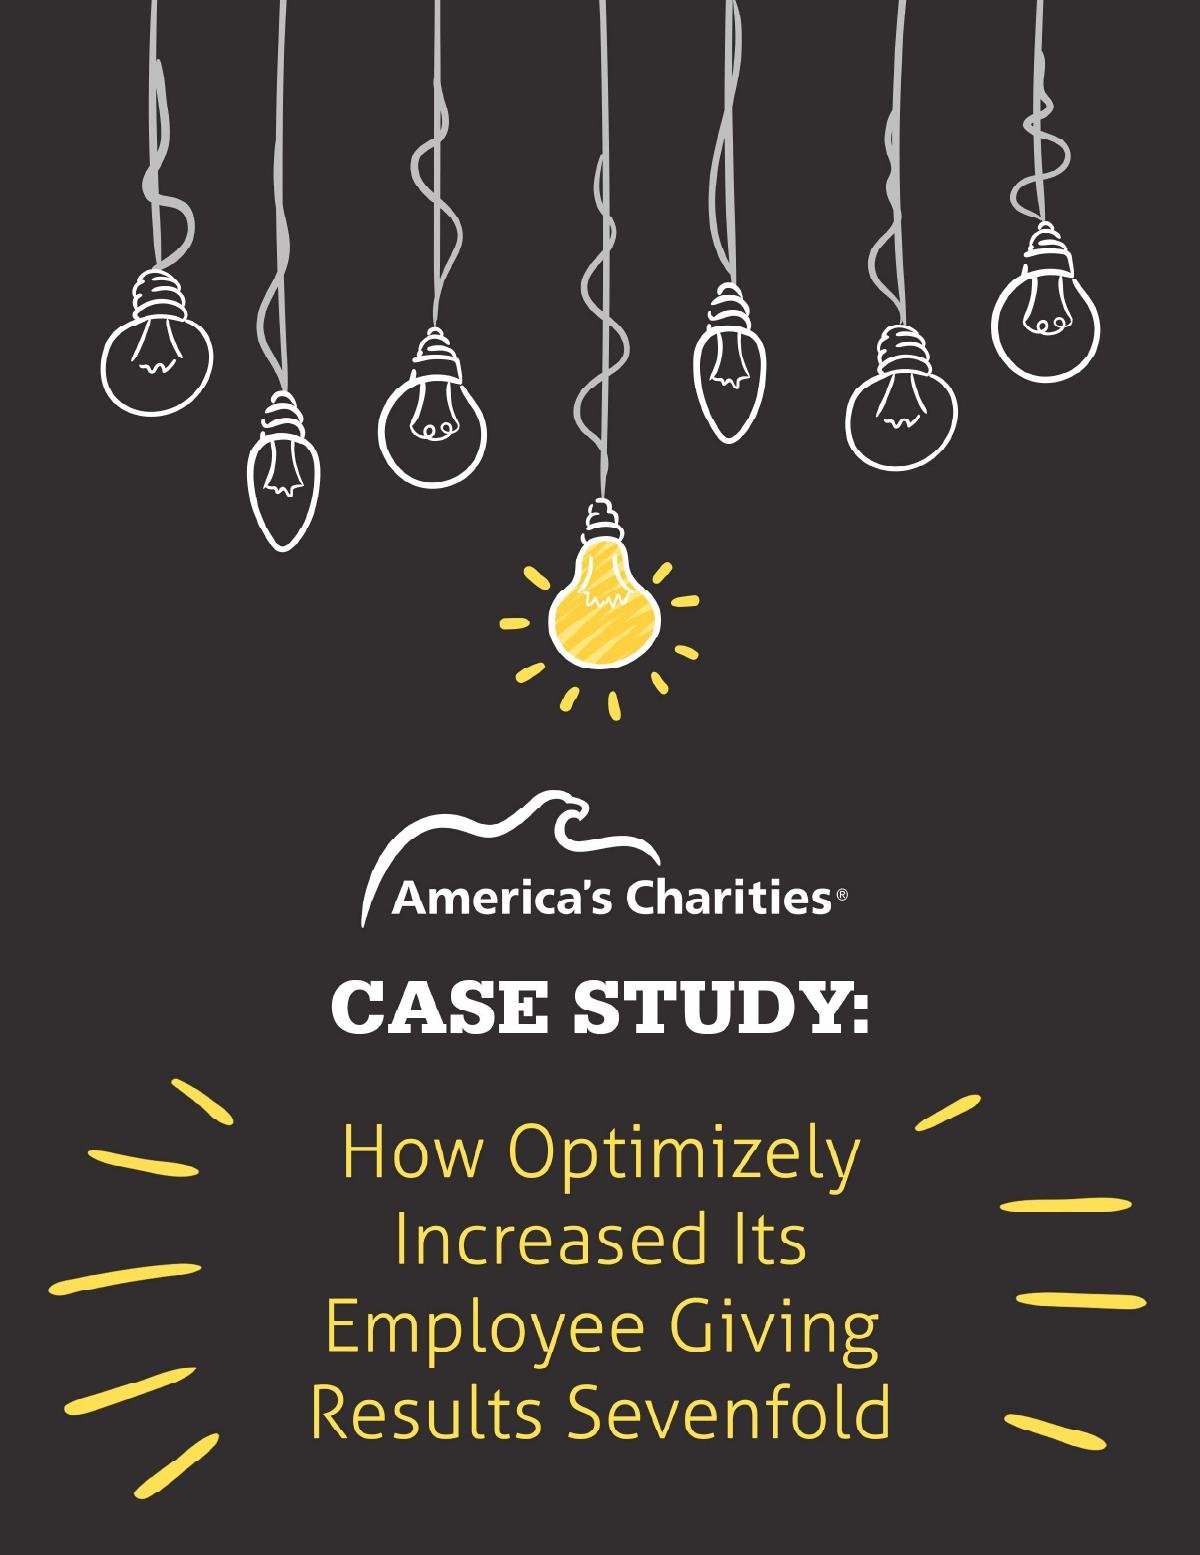 Case Study: How Optimizely Increased Its Employee Giving Results Sevenfold